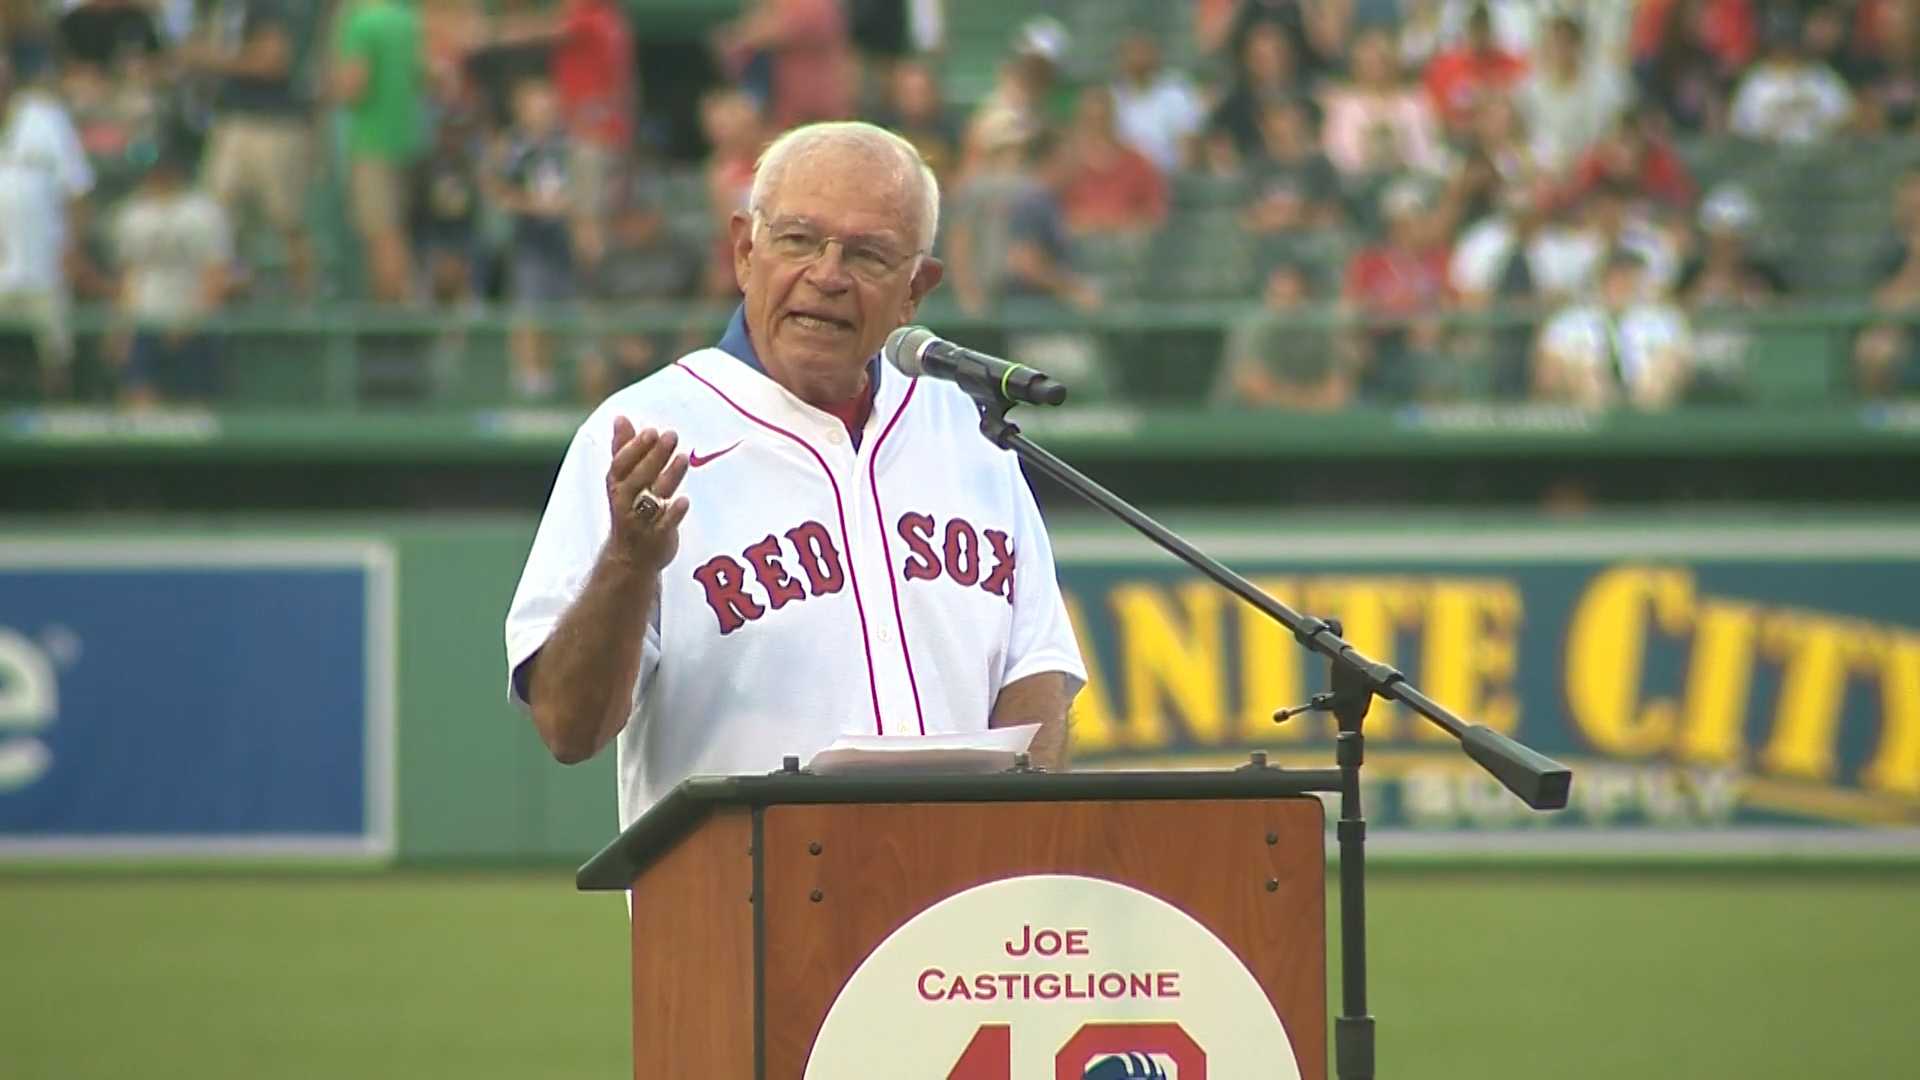 Red Sox broadcaster Castiglione finalist for Hall of Fame award